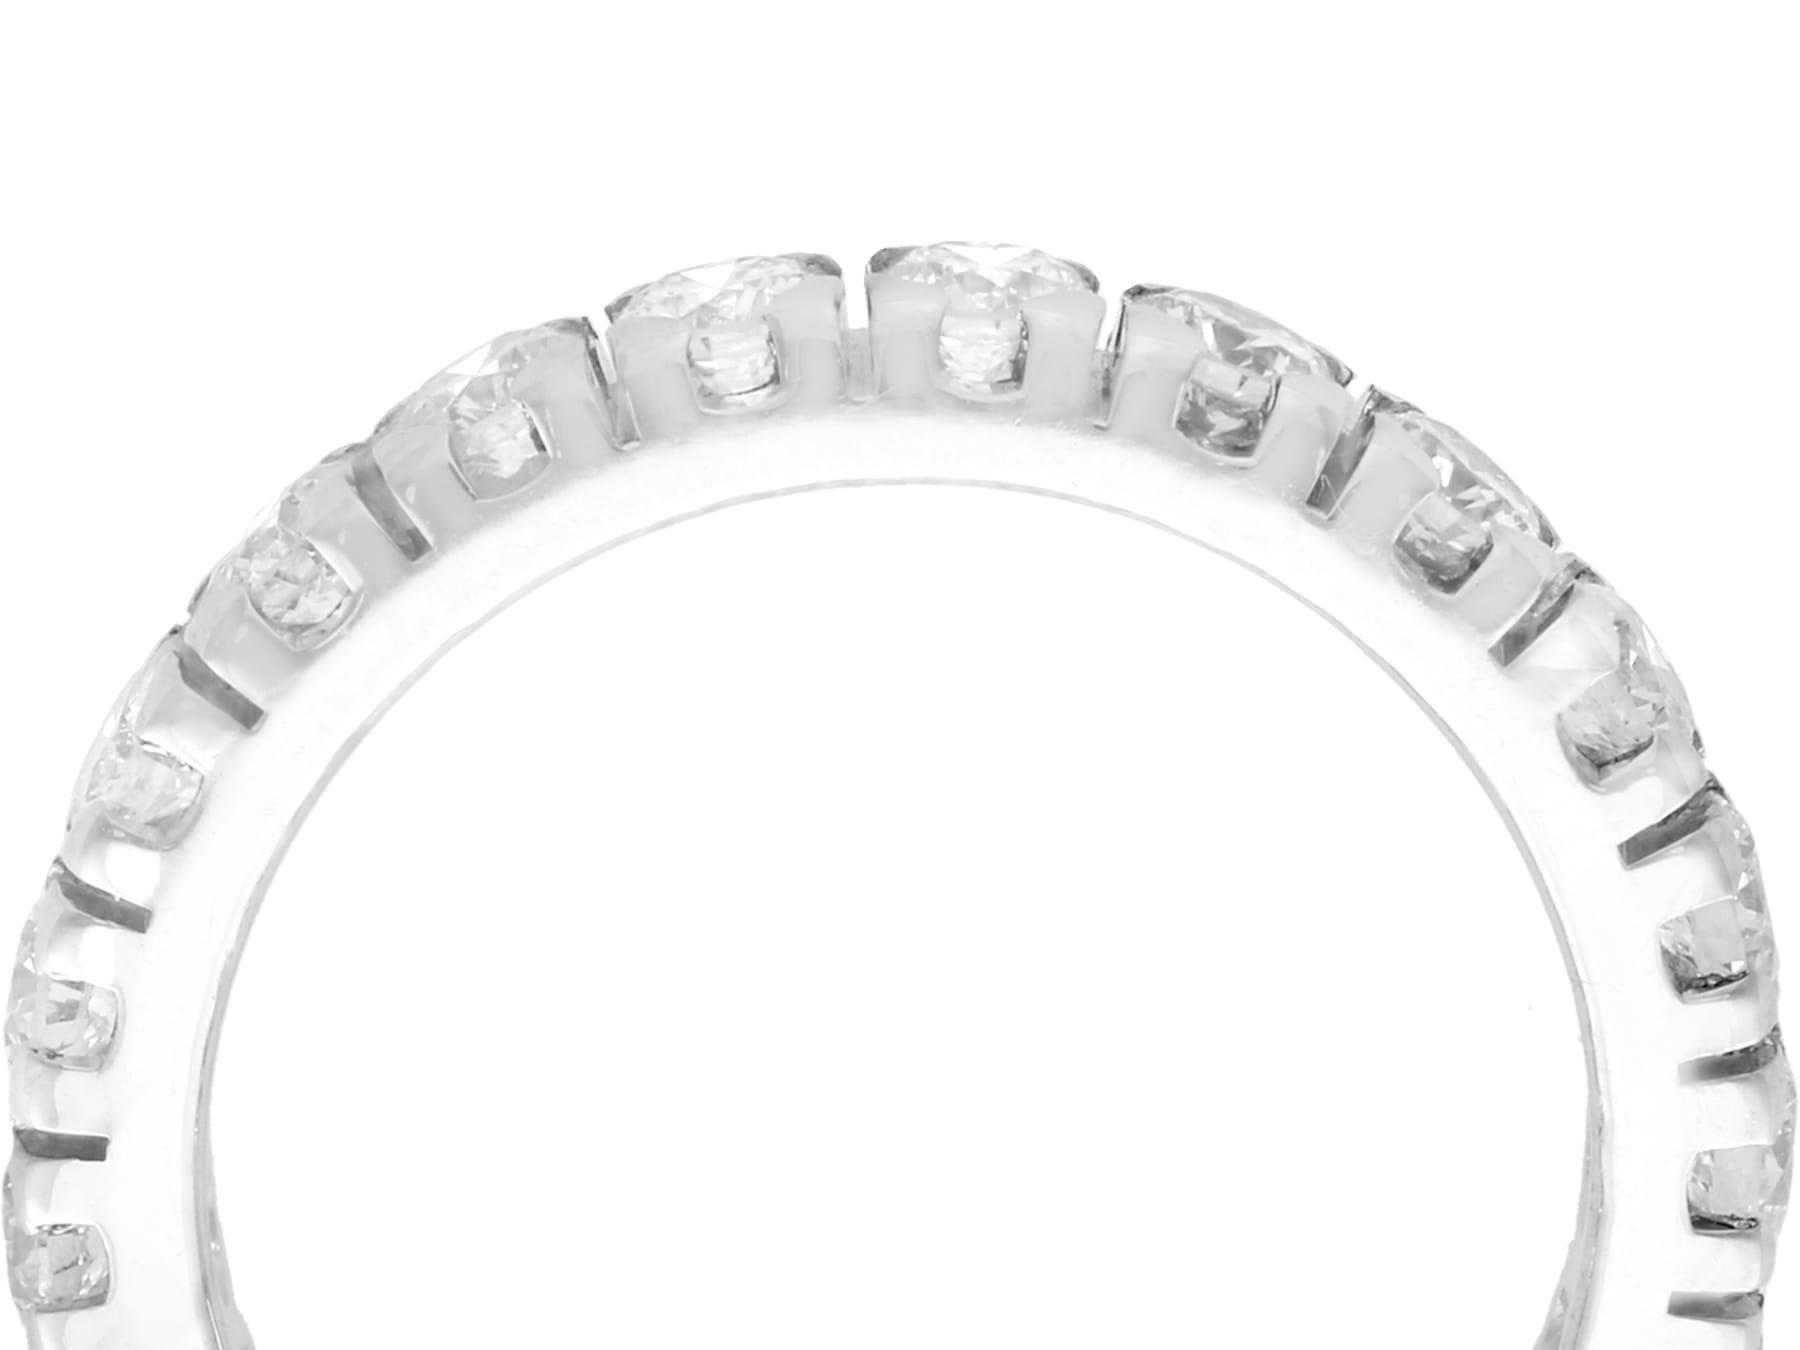 A fine and impressive 1.76 carat diamond and 18 karat white gold full eternity ring; part of our vintage jewelry collections.

This fine and impressive vintage eternity ring has been crafted in 18k white gold.

This full eternity ring displays